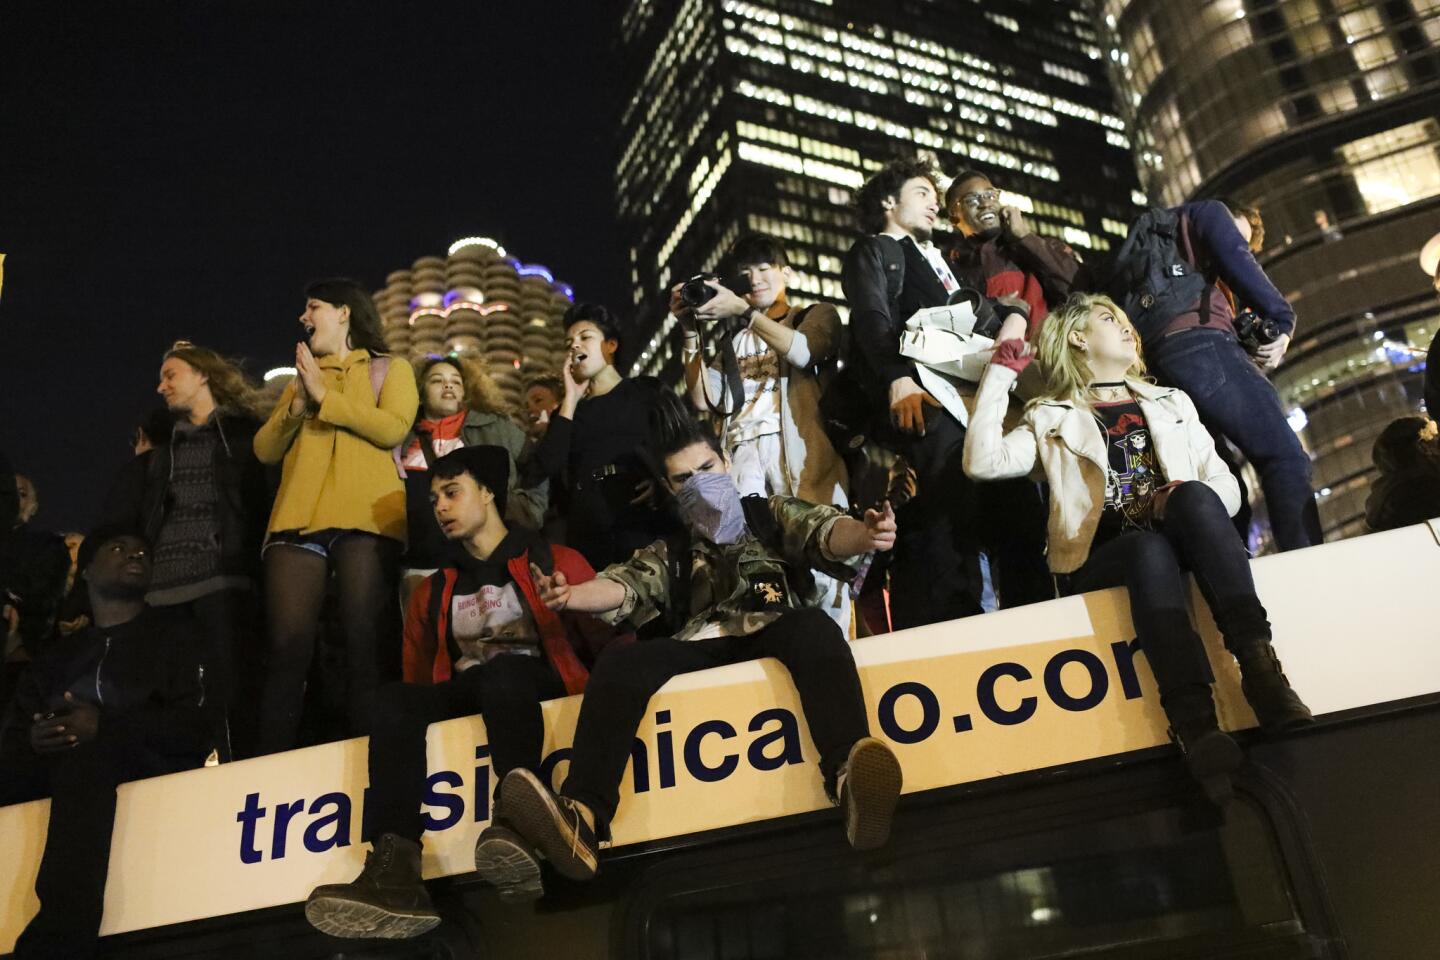 Protesters stand on a bus near the intersection of North Wabash Avenue and East Upper Wacker Drive while marching on Nov. 9, 2016, the day after Donald Trump won the presidential election.